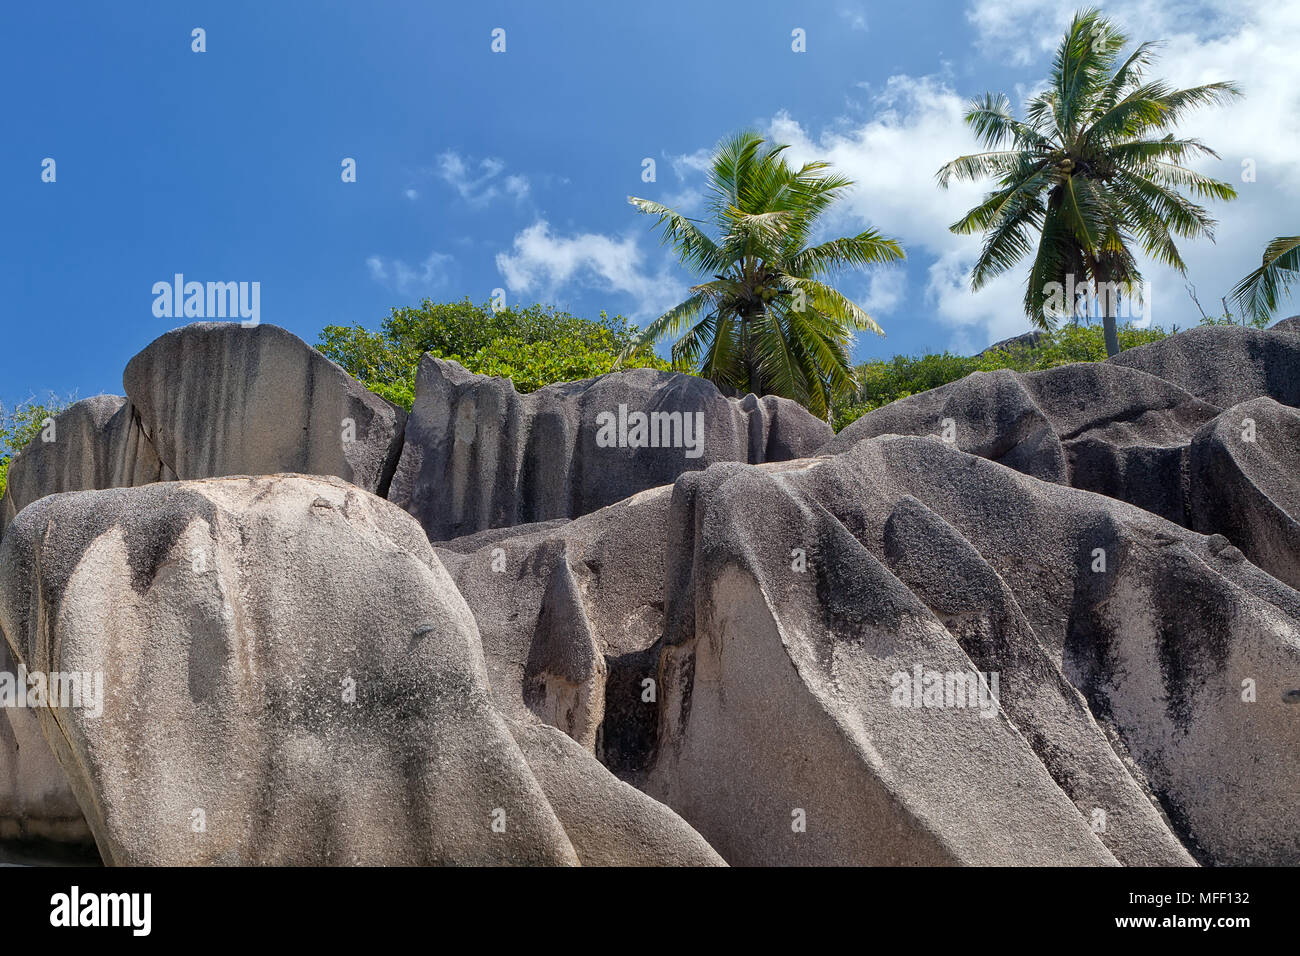 Anse Source d'Argent - granite rocks at beautiful beach on tropical island La Digue in Seychelles Stock Photo